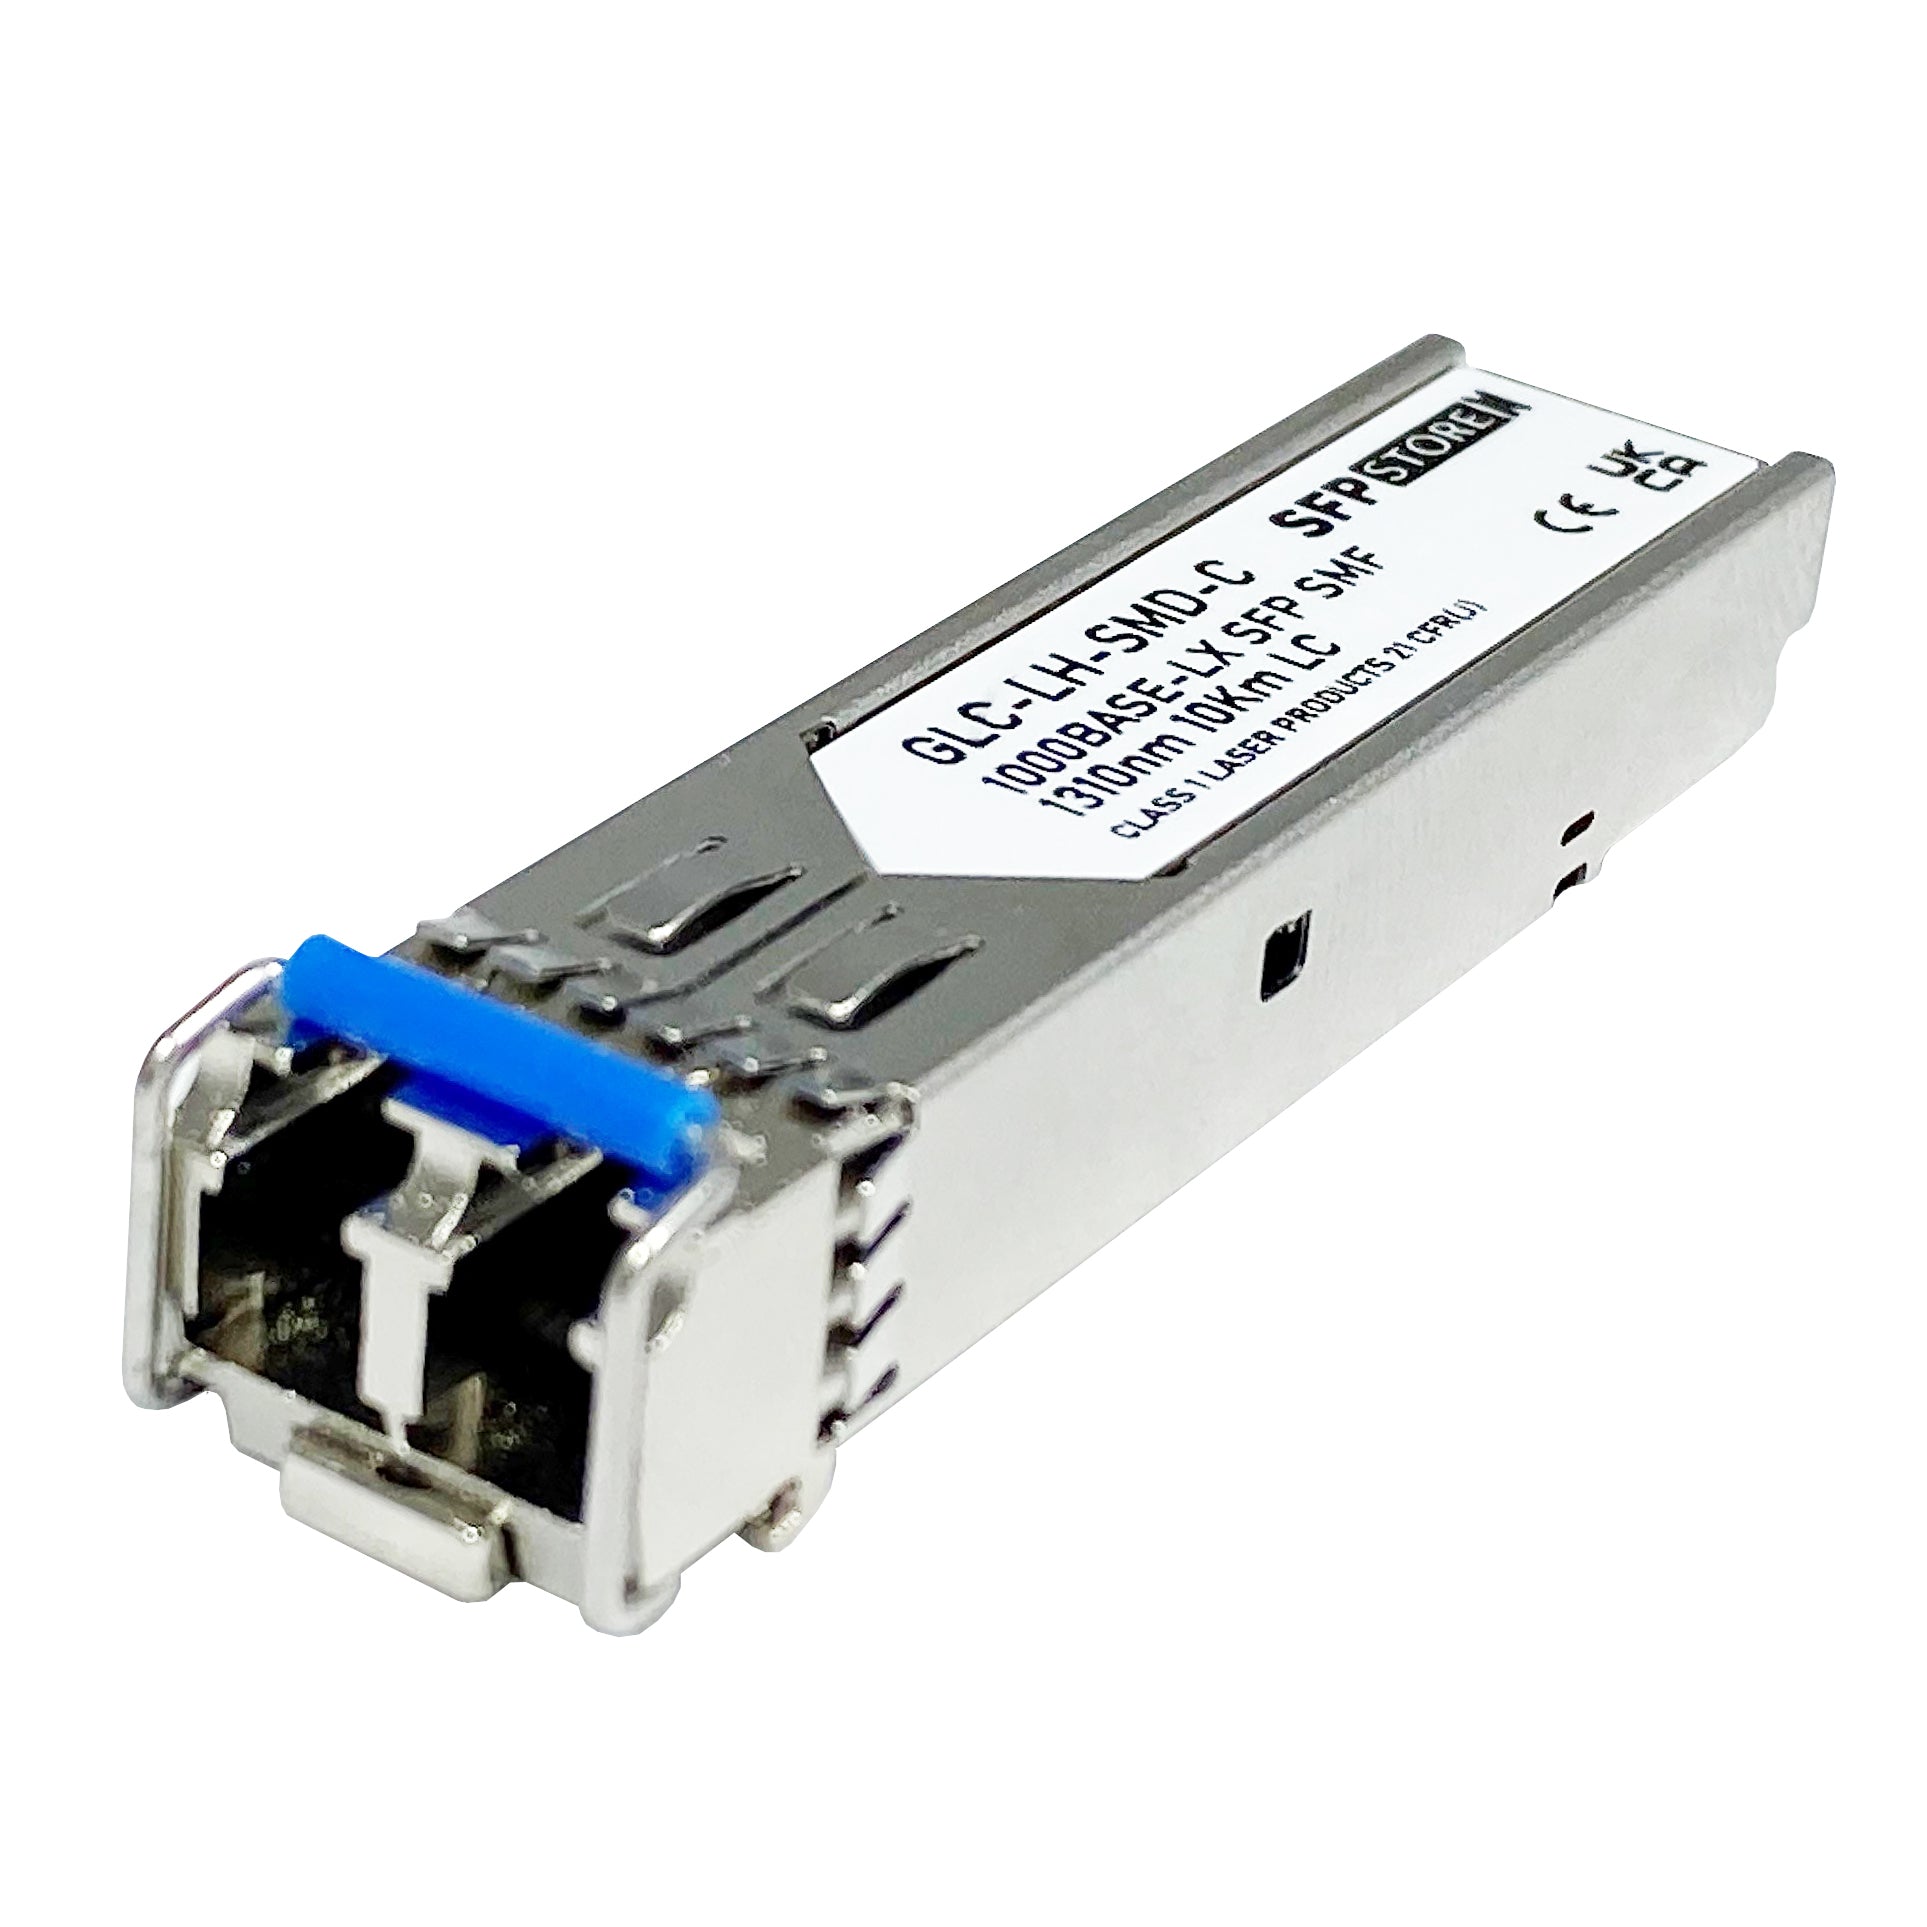 F5-UPG-SFPLX-R-C F5 Networks Compatible 1G LH SFP LC Transceiver